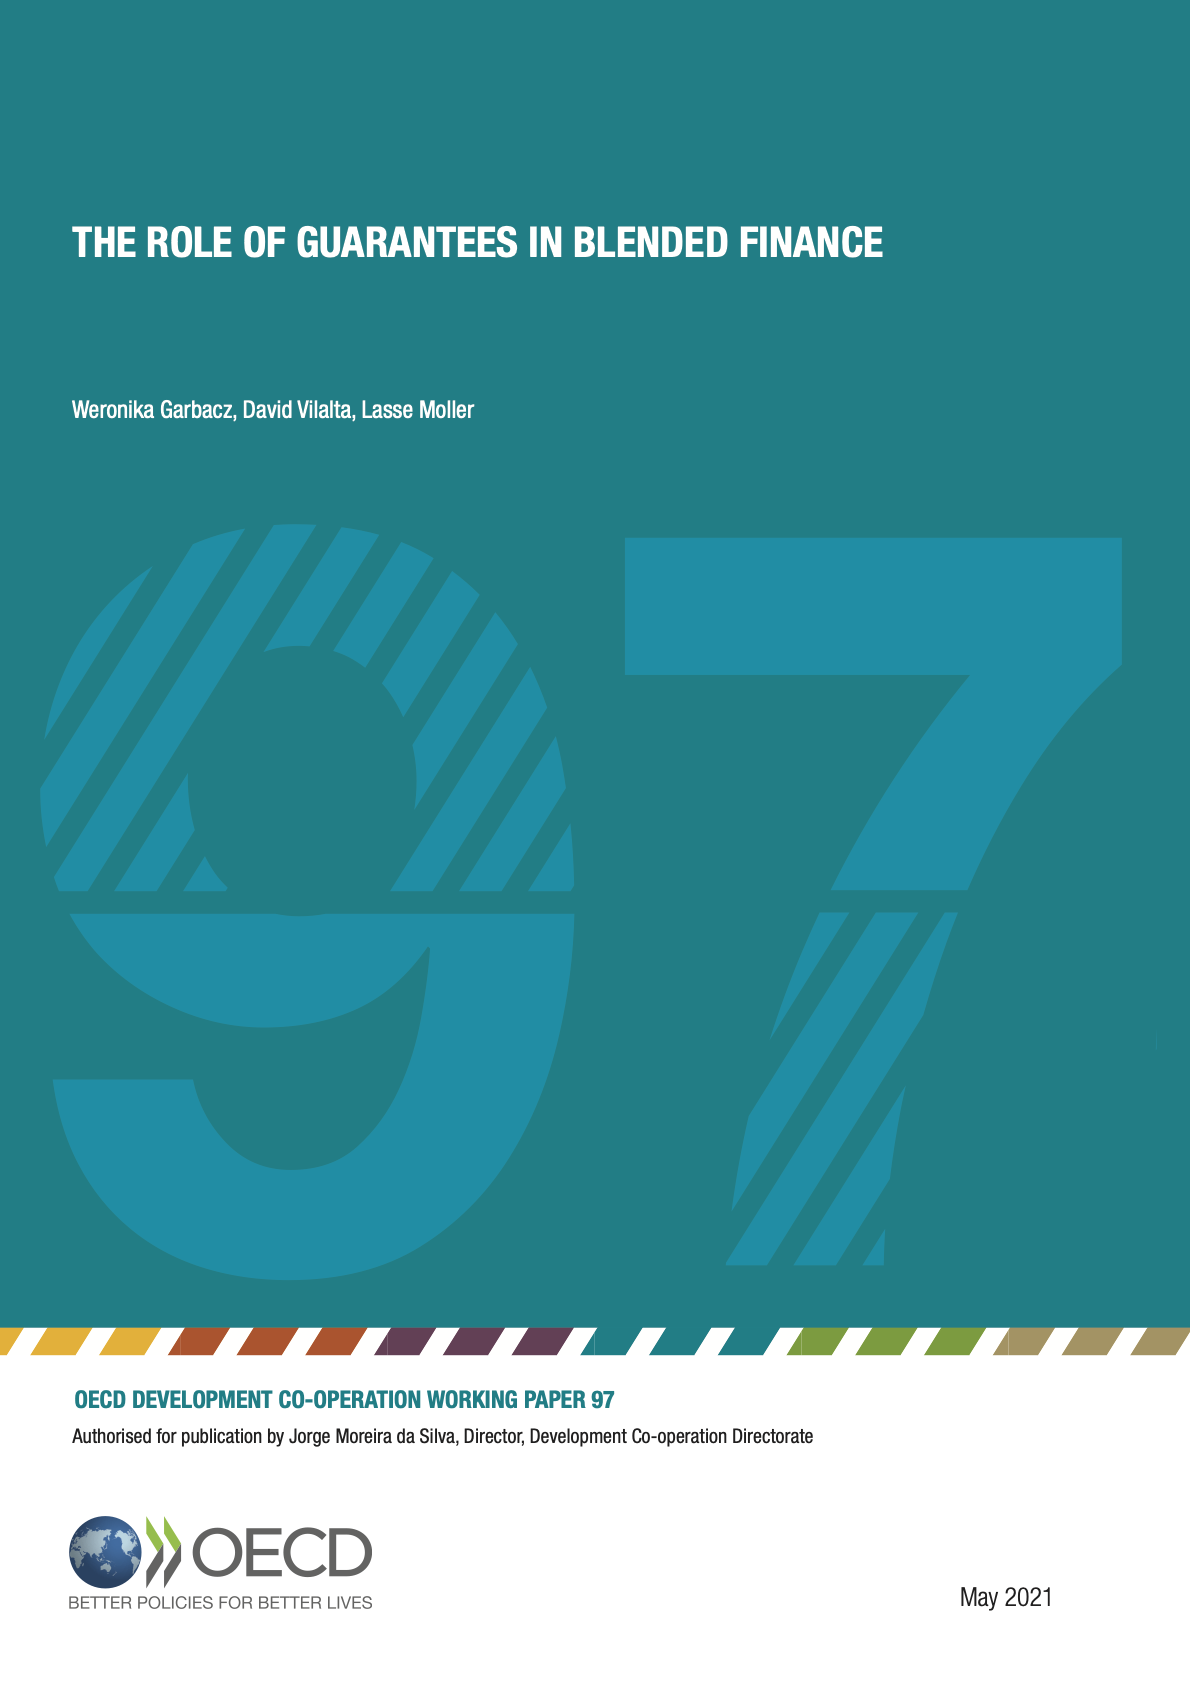 The Role of Guarantees in Blended Finance - Working Paper